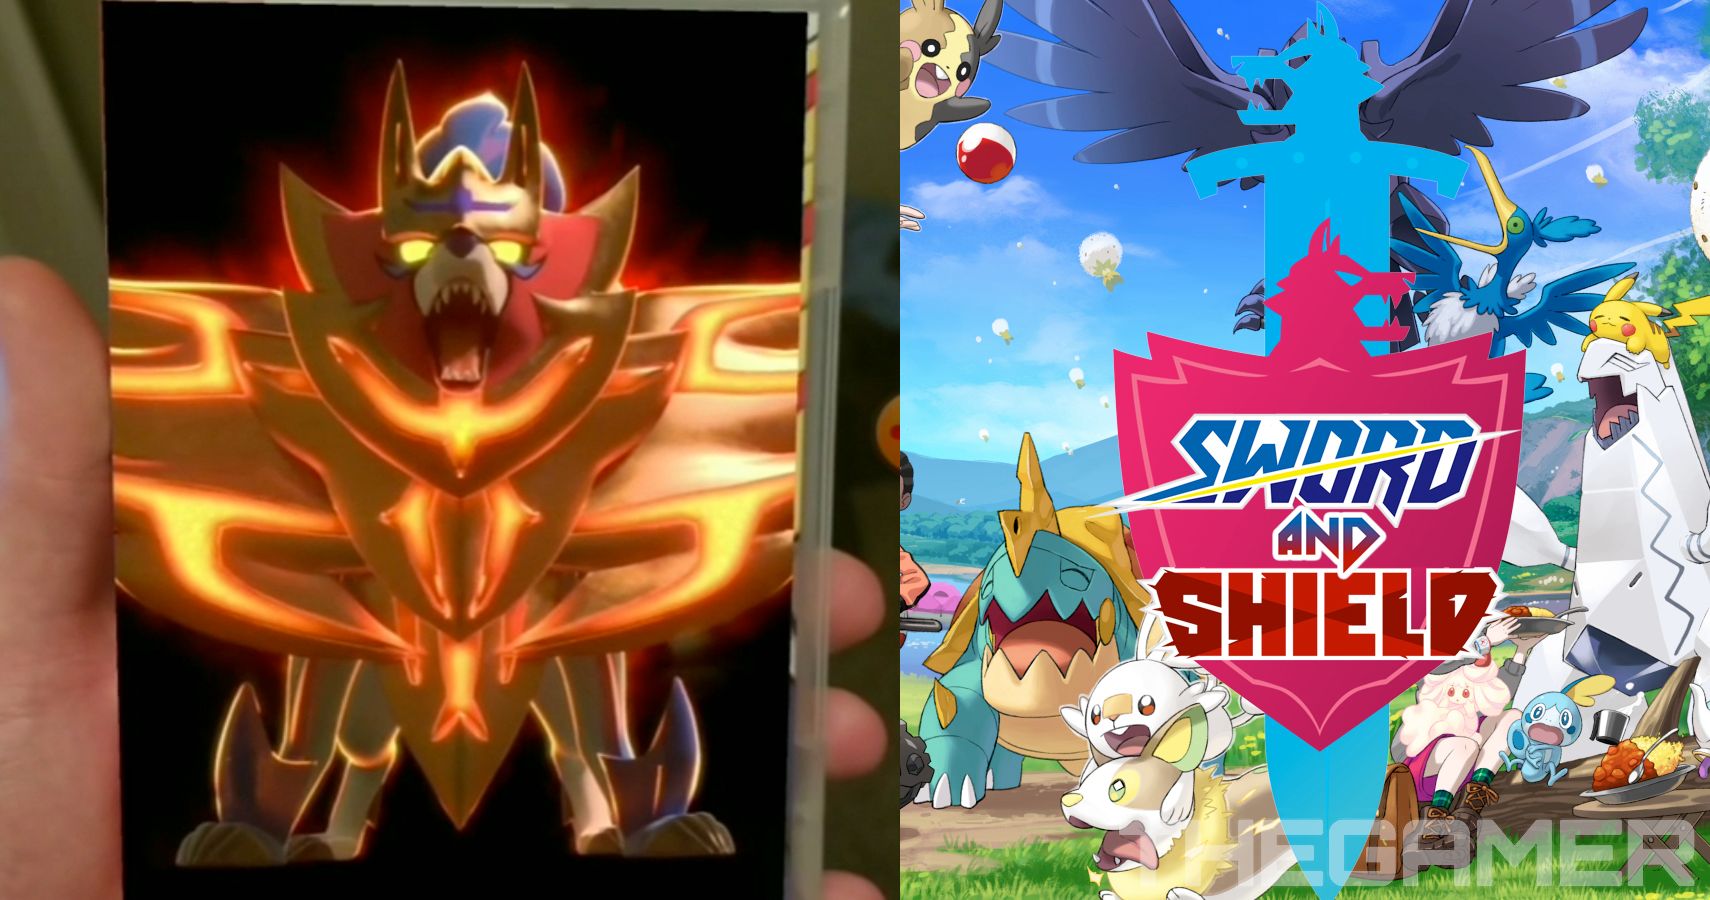 Video: Watch Google Lens Bring The Pokémon Sword And Shield Japanese Box  Art To Life